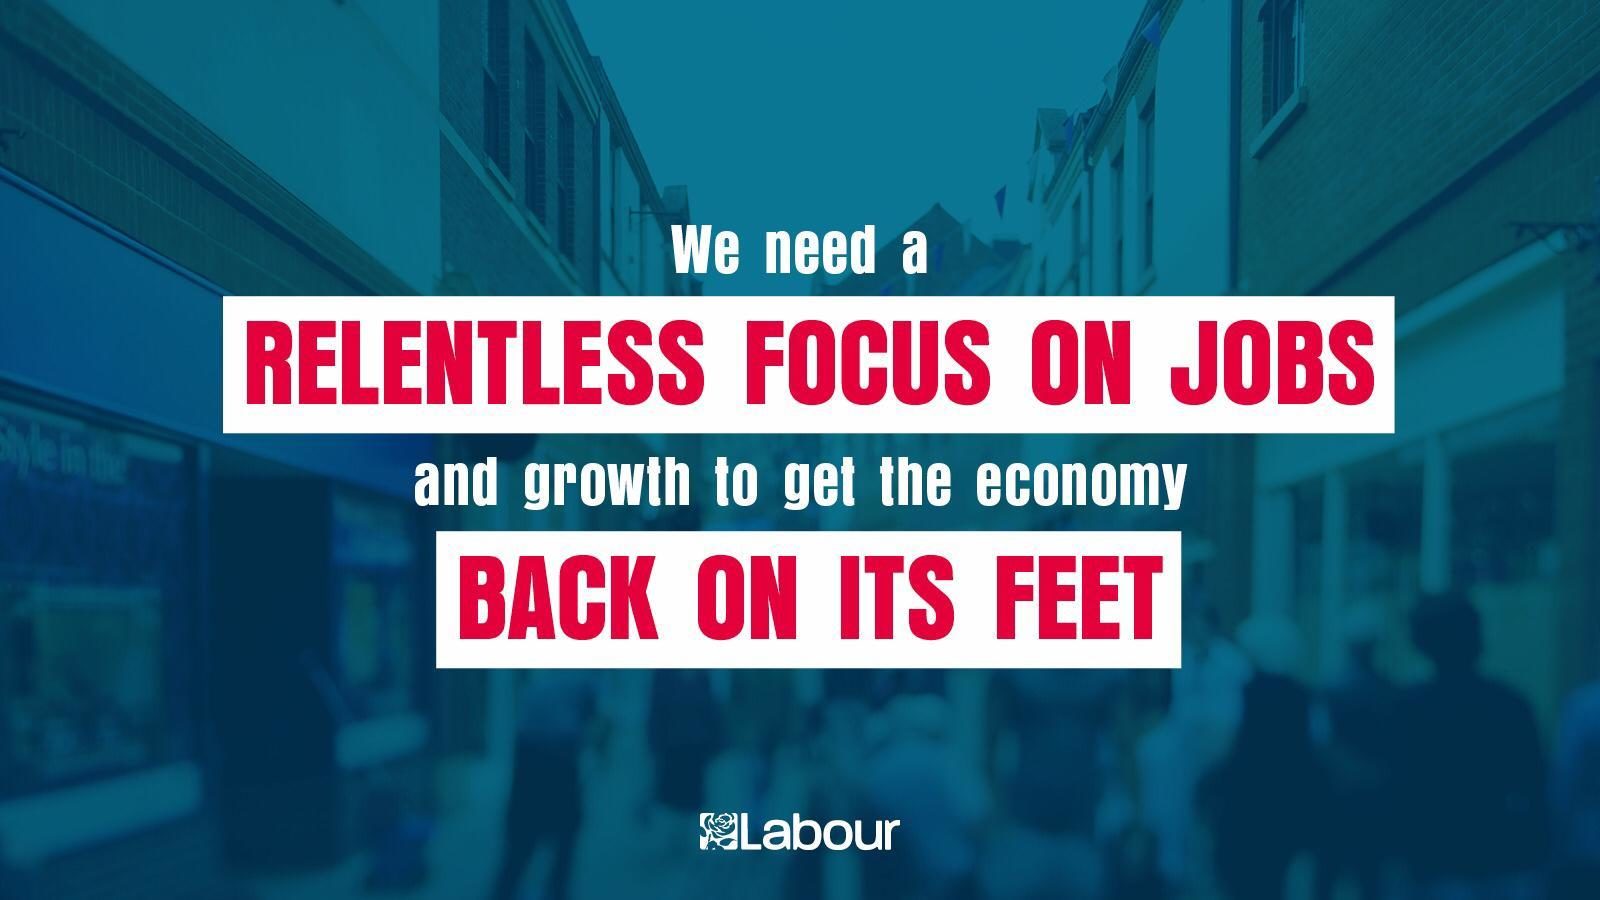 labour party graphic reading "we need a relentless focus on jobs and growth to get the economy back on its feet"